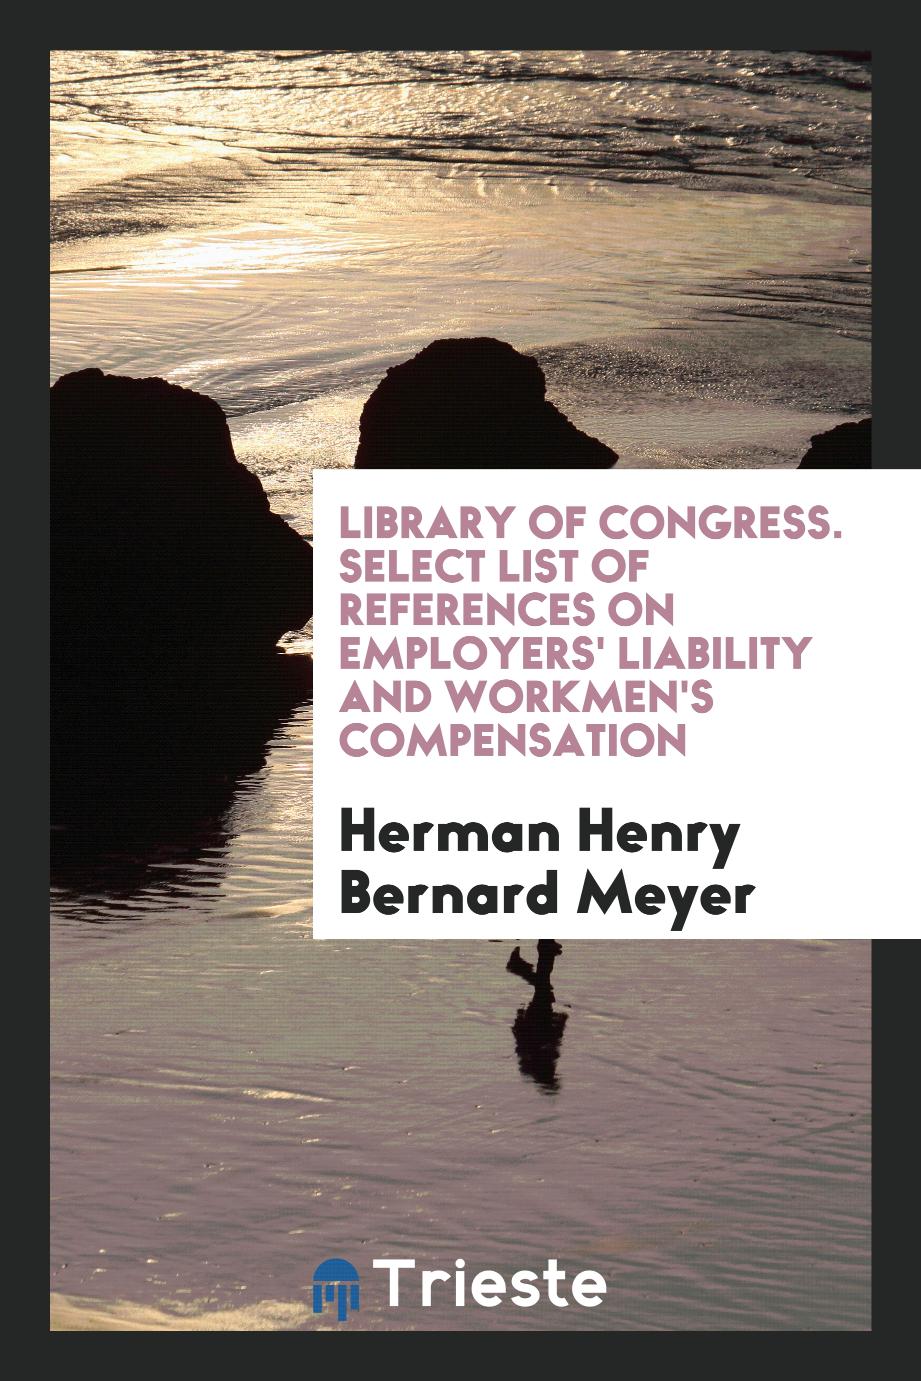 Library of Congress. Select List of References on Employers' Liability and Workmen's Compensation